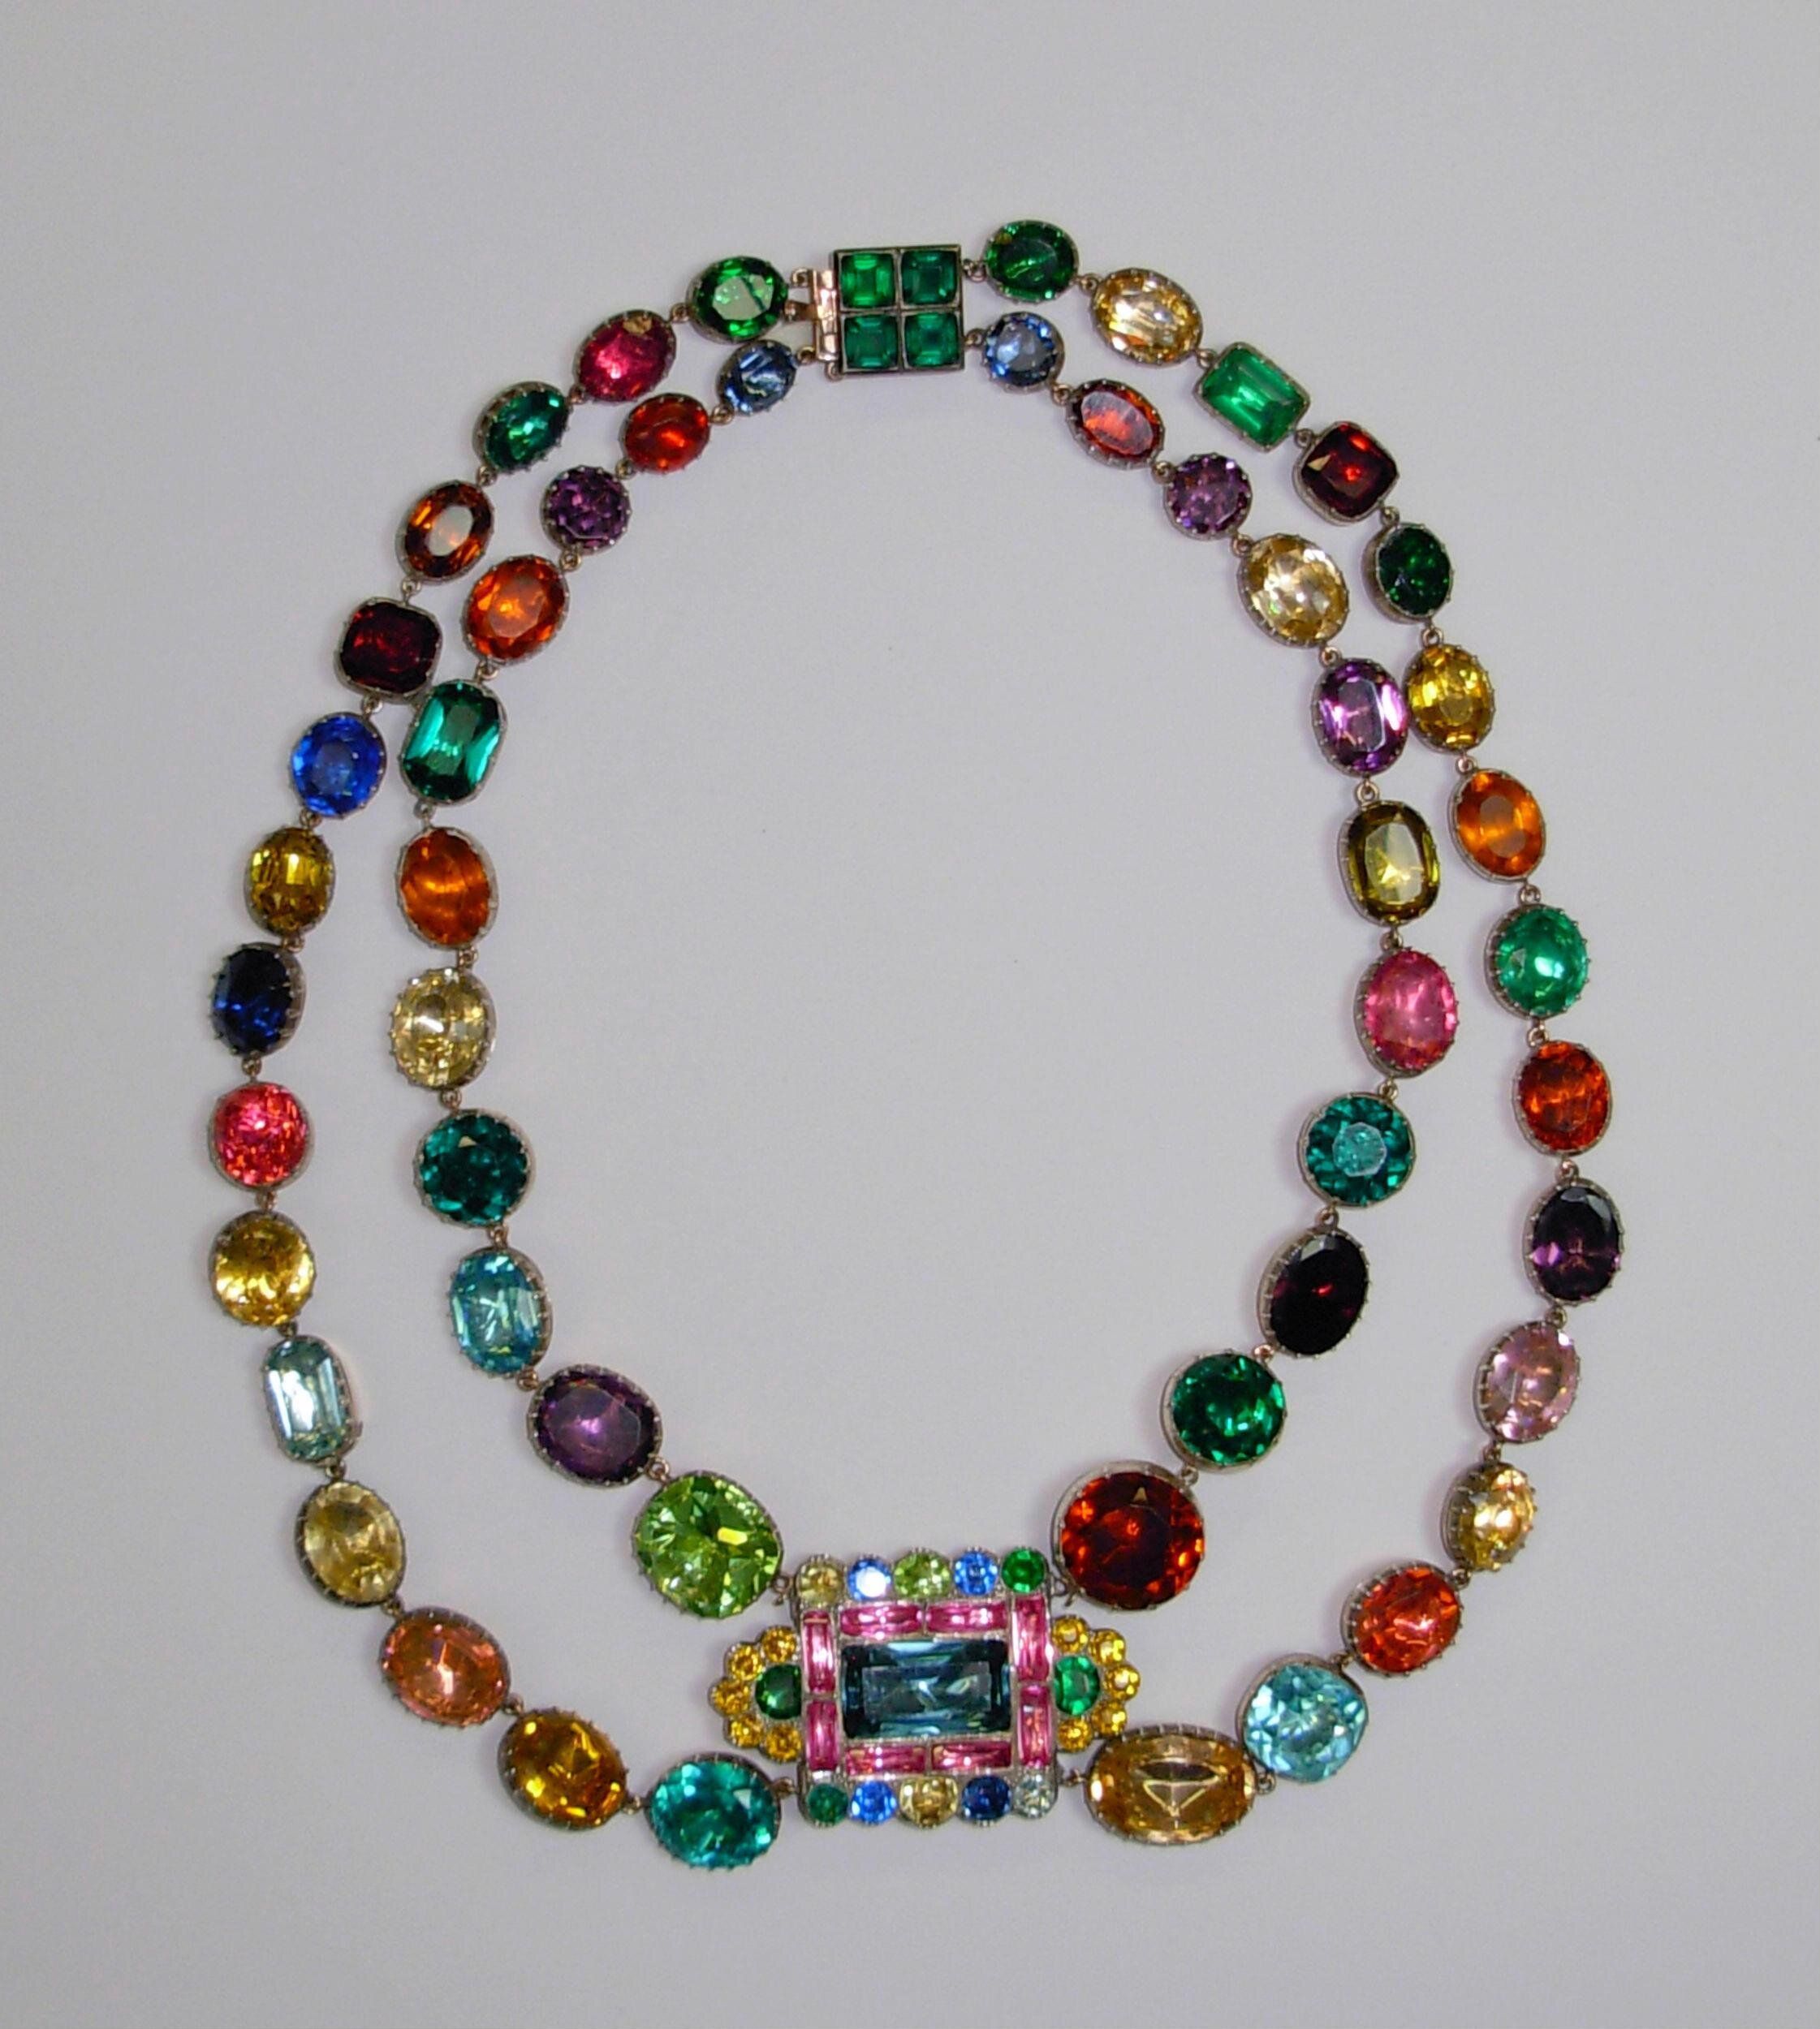 two-tier colored paste necklace, 1800-1850 from the collection of the Victoria and Albert Museum